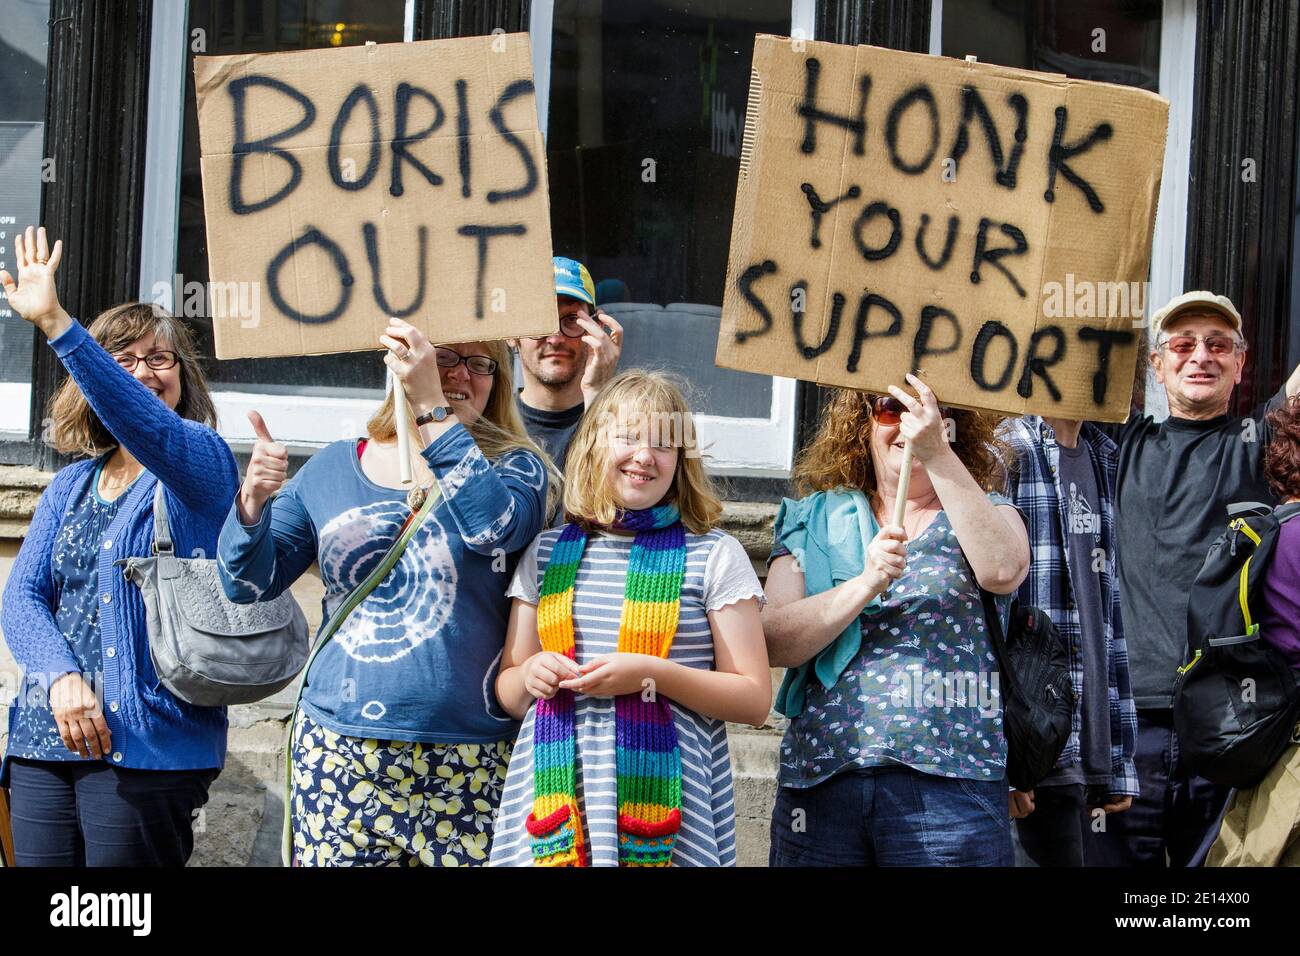 31-08-2019. Anti Boris Johnson Protesters carrying placards are pictured as they protest outside the Chippenham offices of Tory MP Michelle Donelan Stock Photo